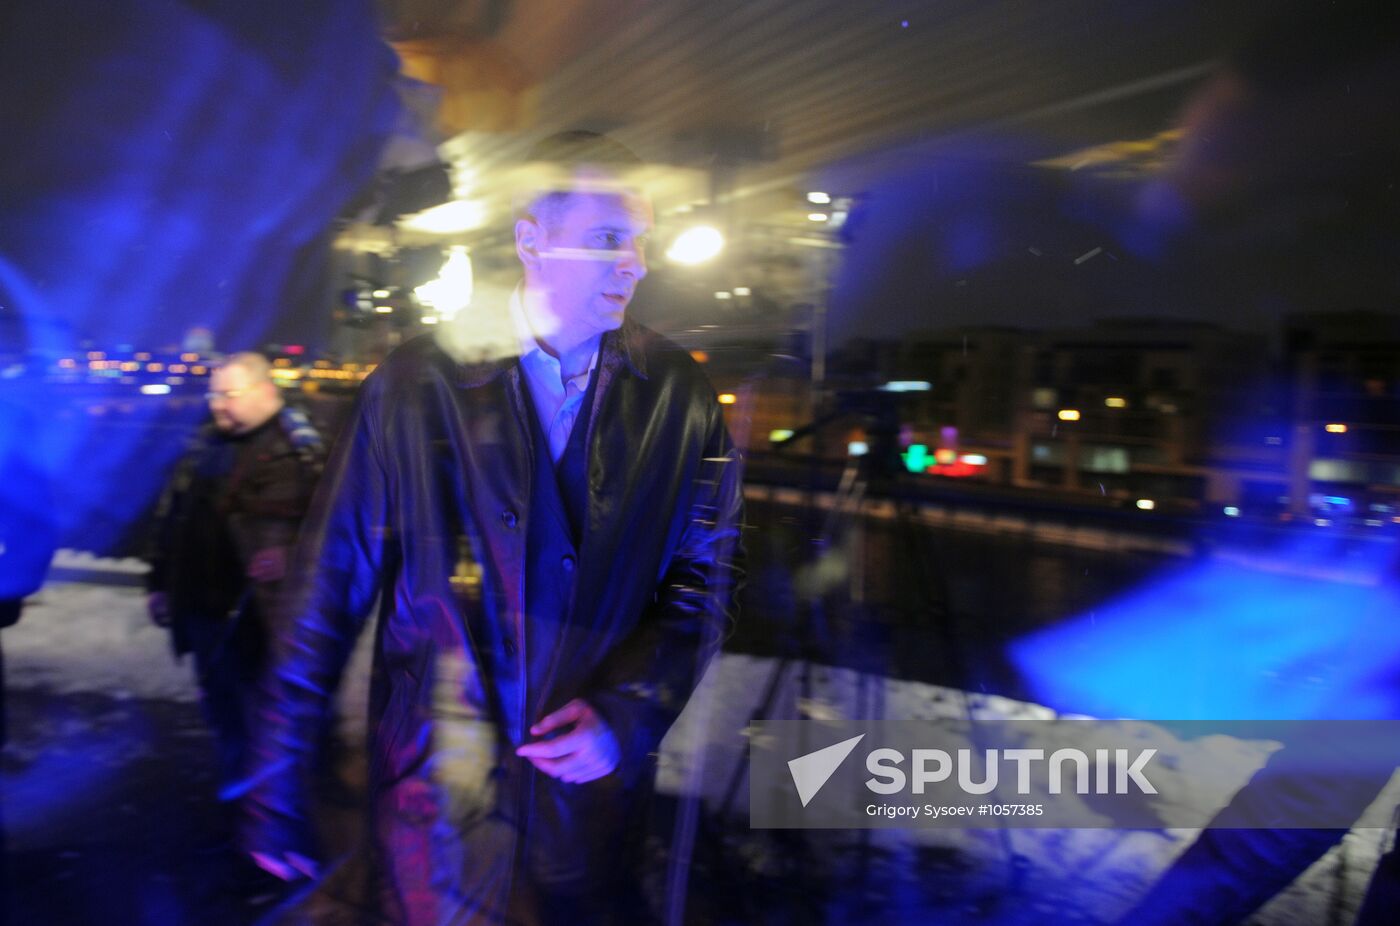 Candidate Mikhail Prokhorov at his campaign headquarters